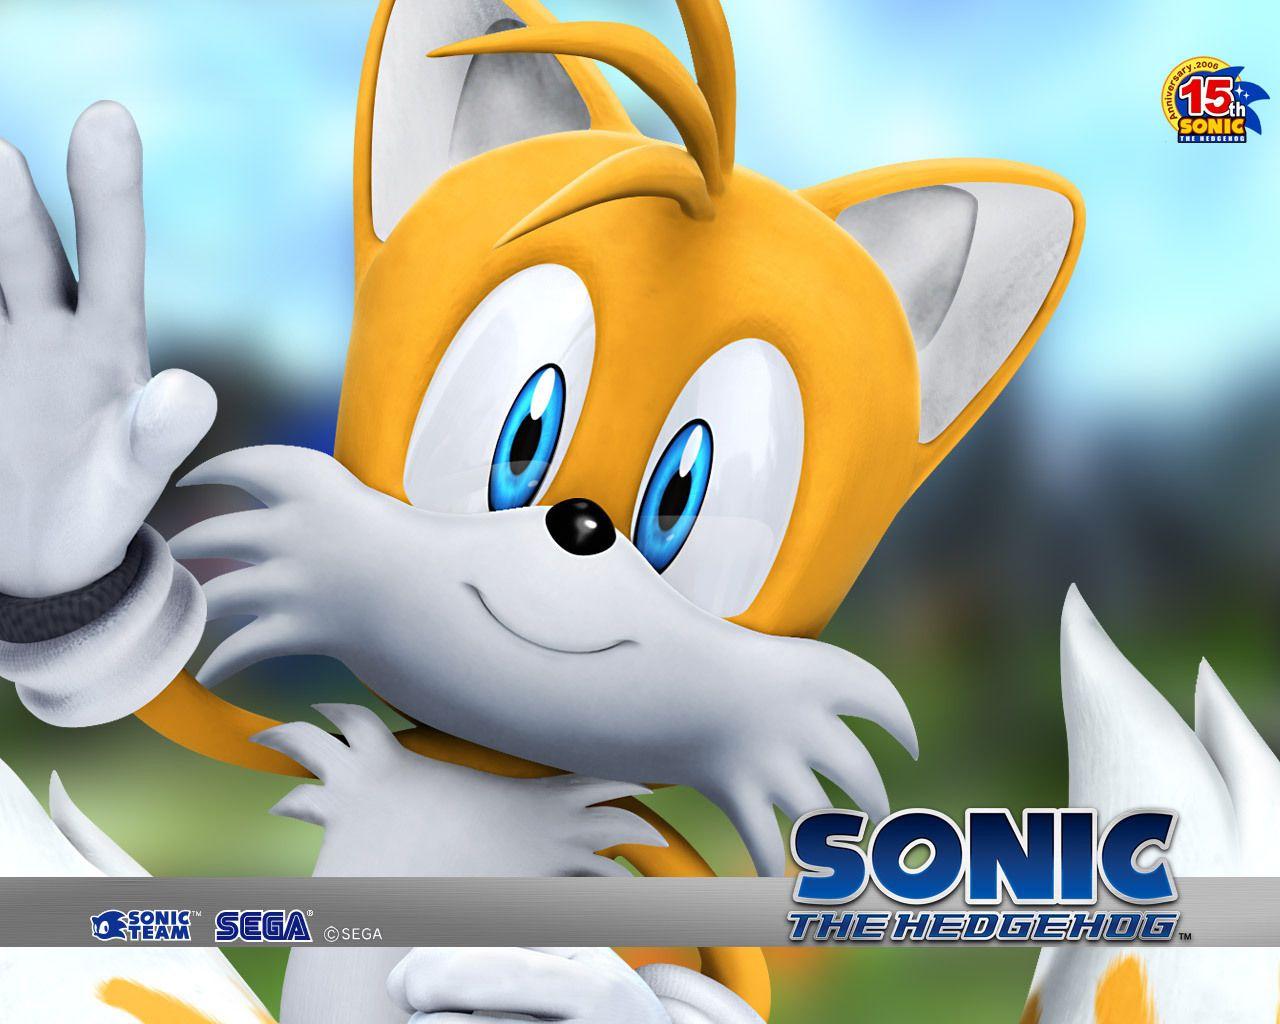 Sonic Characters image tails HD wallpaper and background photo